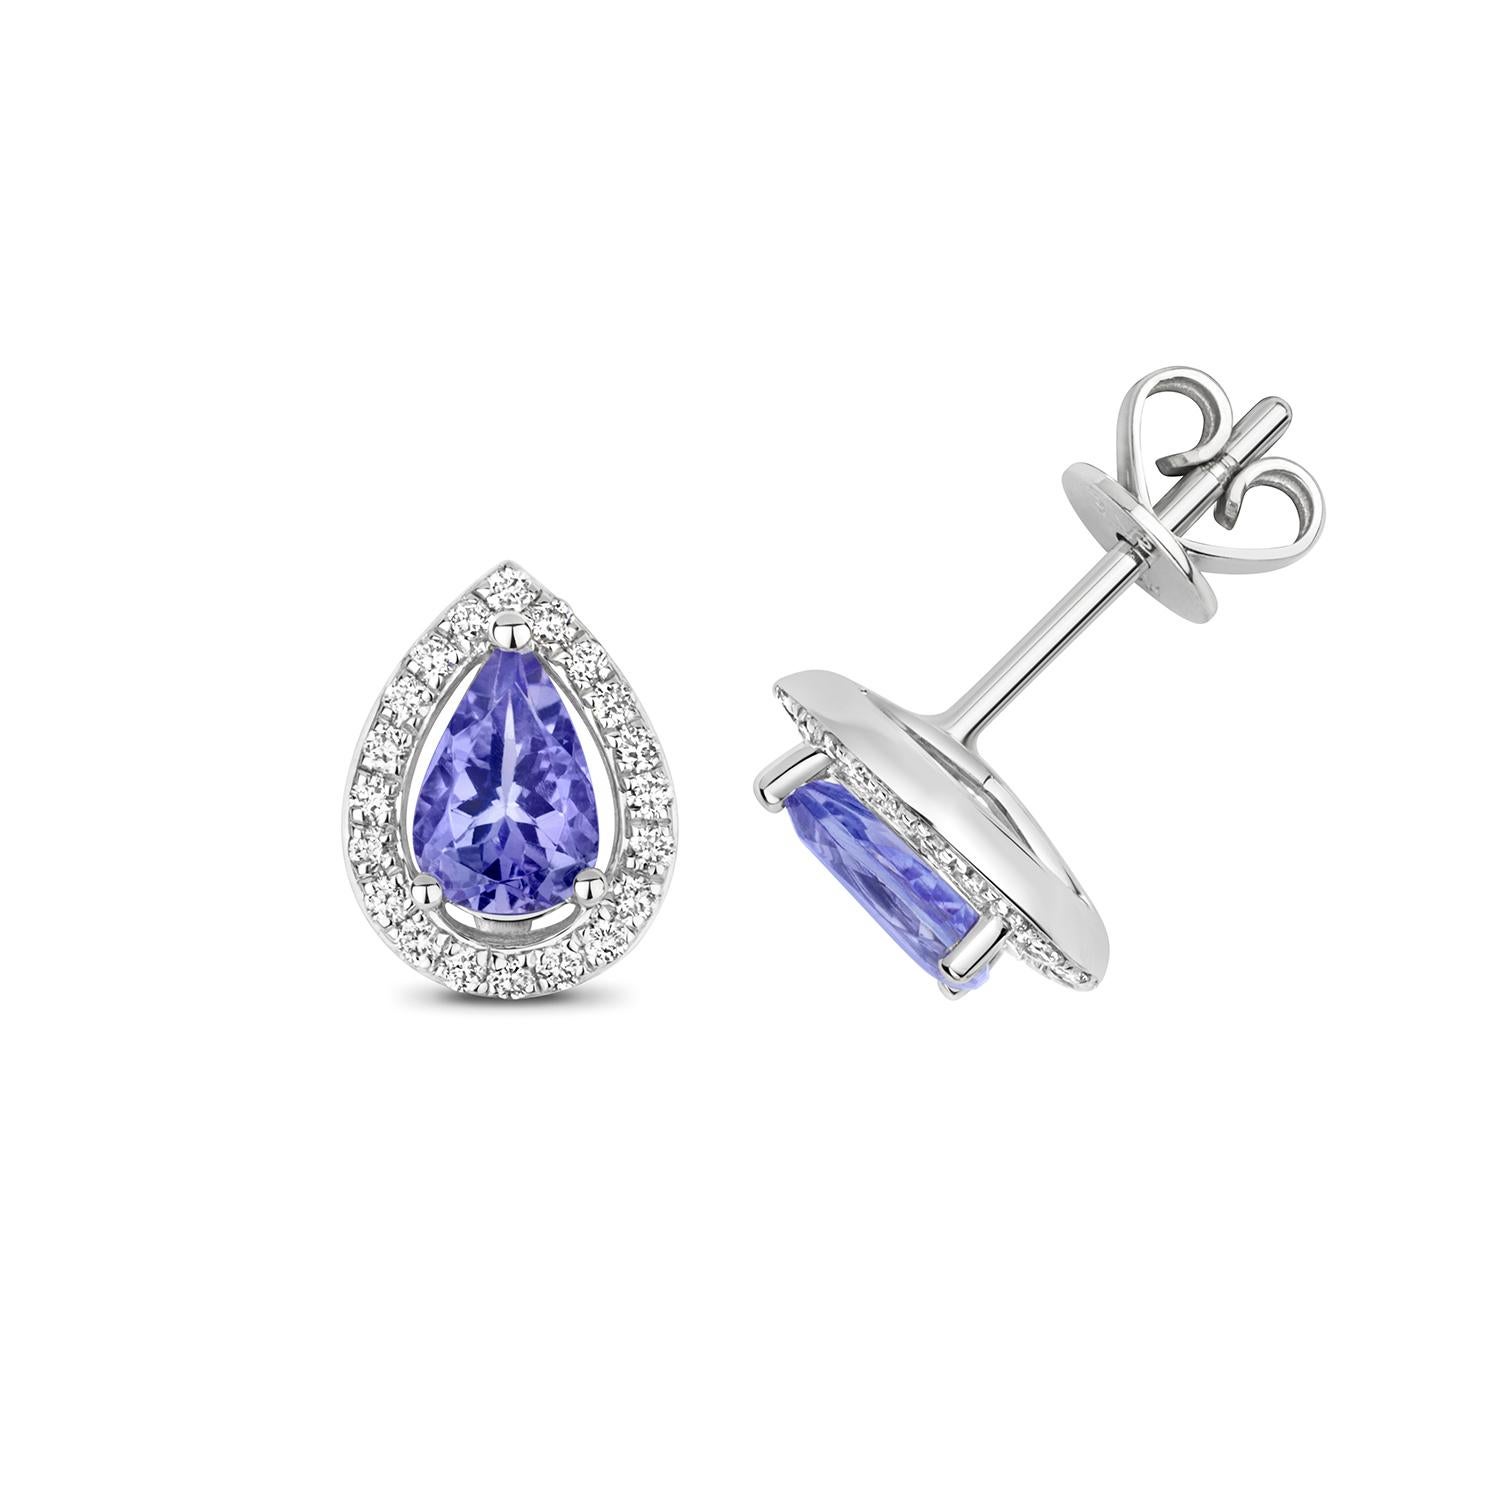 DIAMOND AND TANZANITE HALO STUDS OPEAR

9K W/G 40RD/0.17 2TAN/0.72

Weight: 1.4g

Number Of Stones:2+40

Total Carates:0.720+0.170